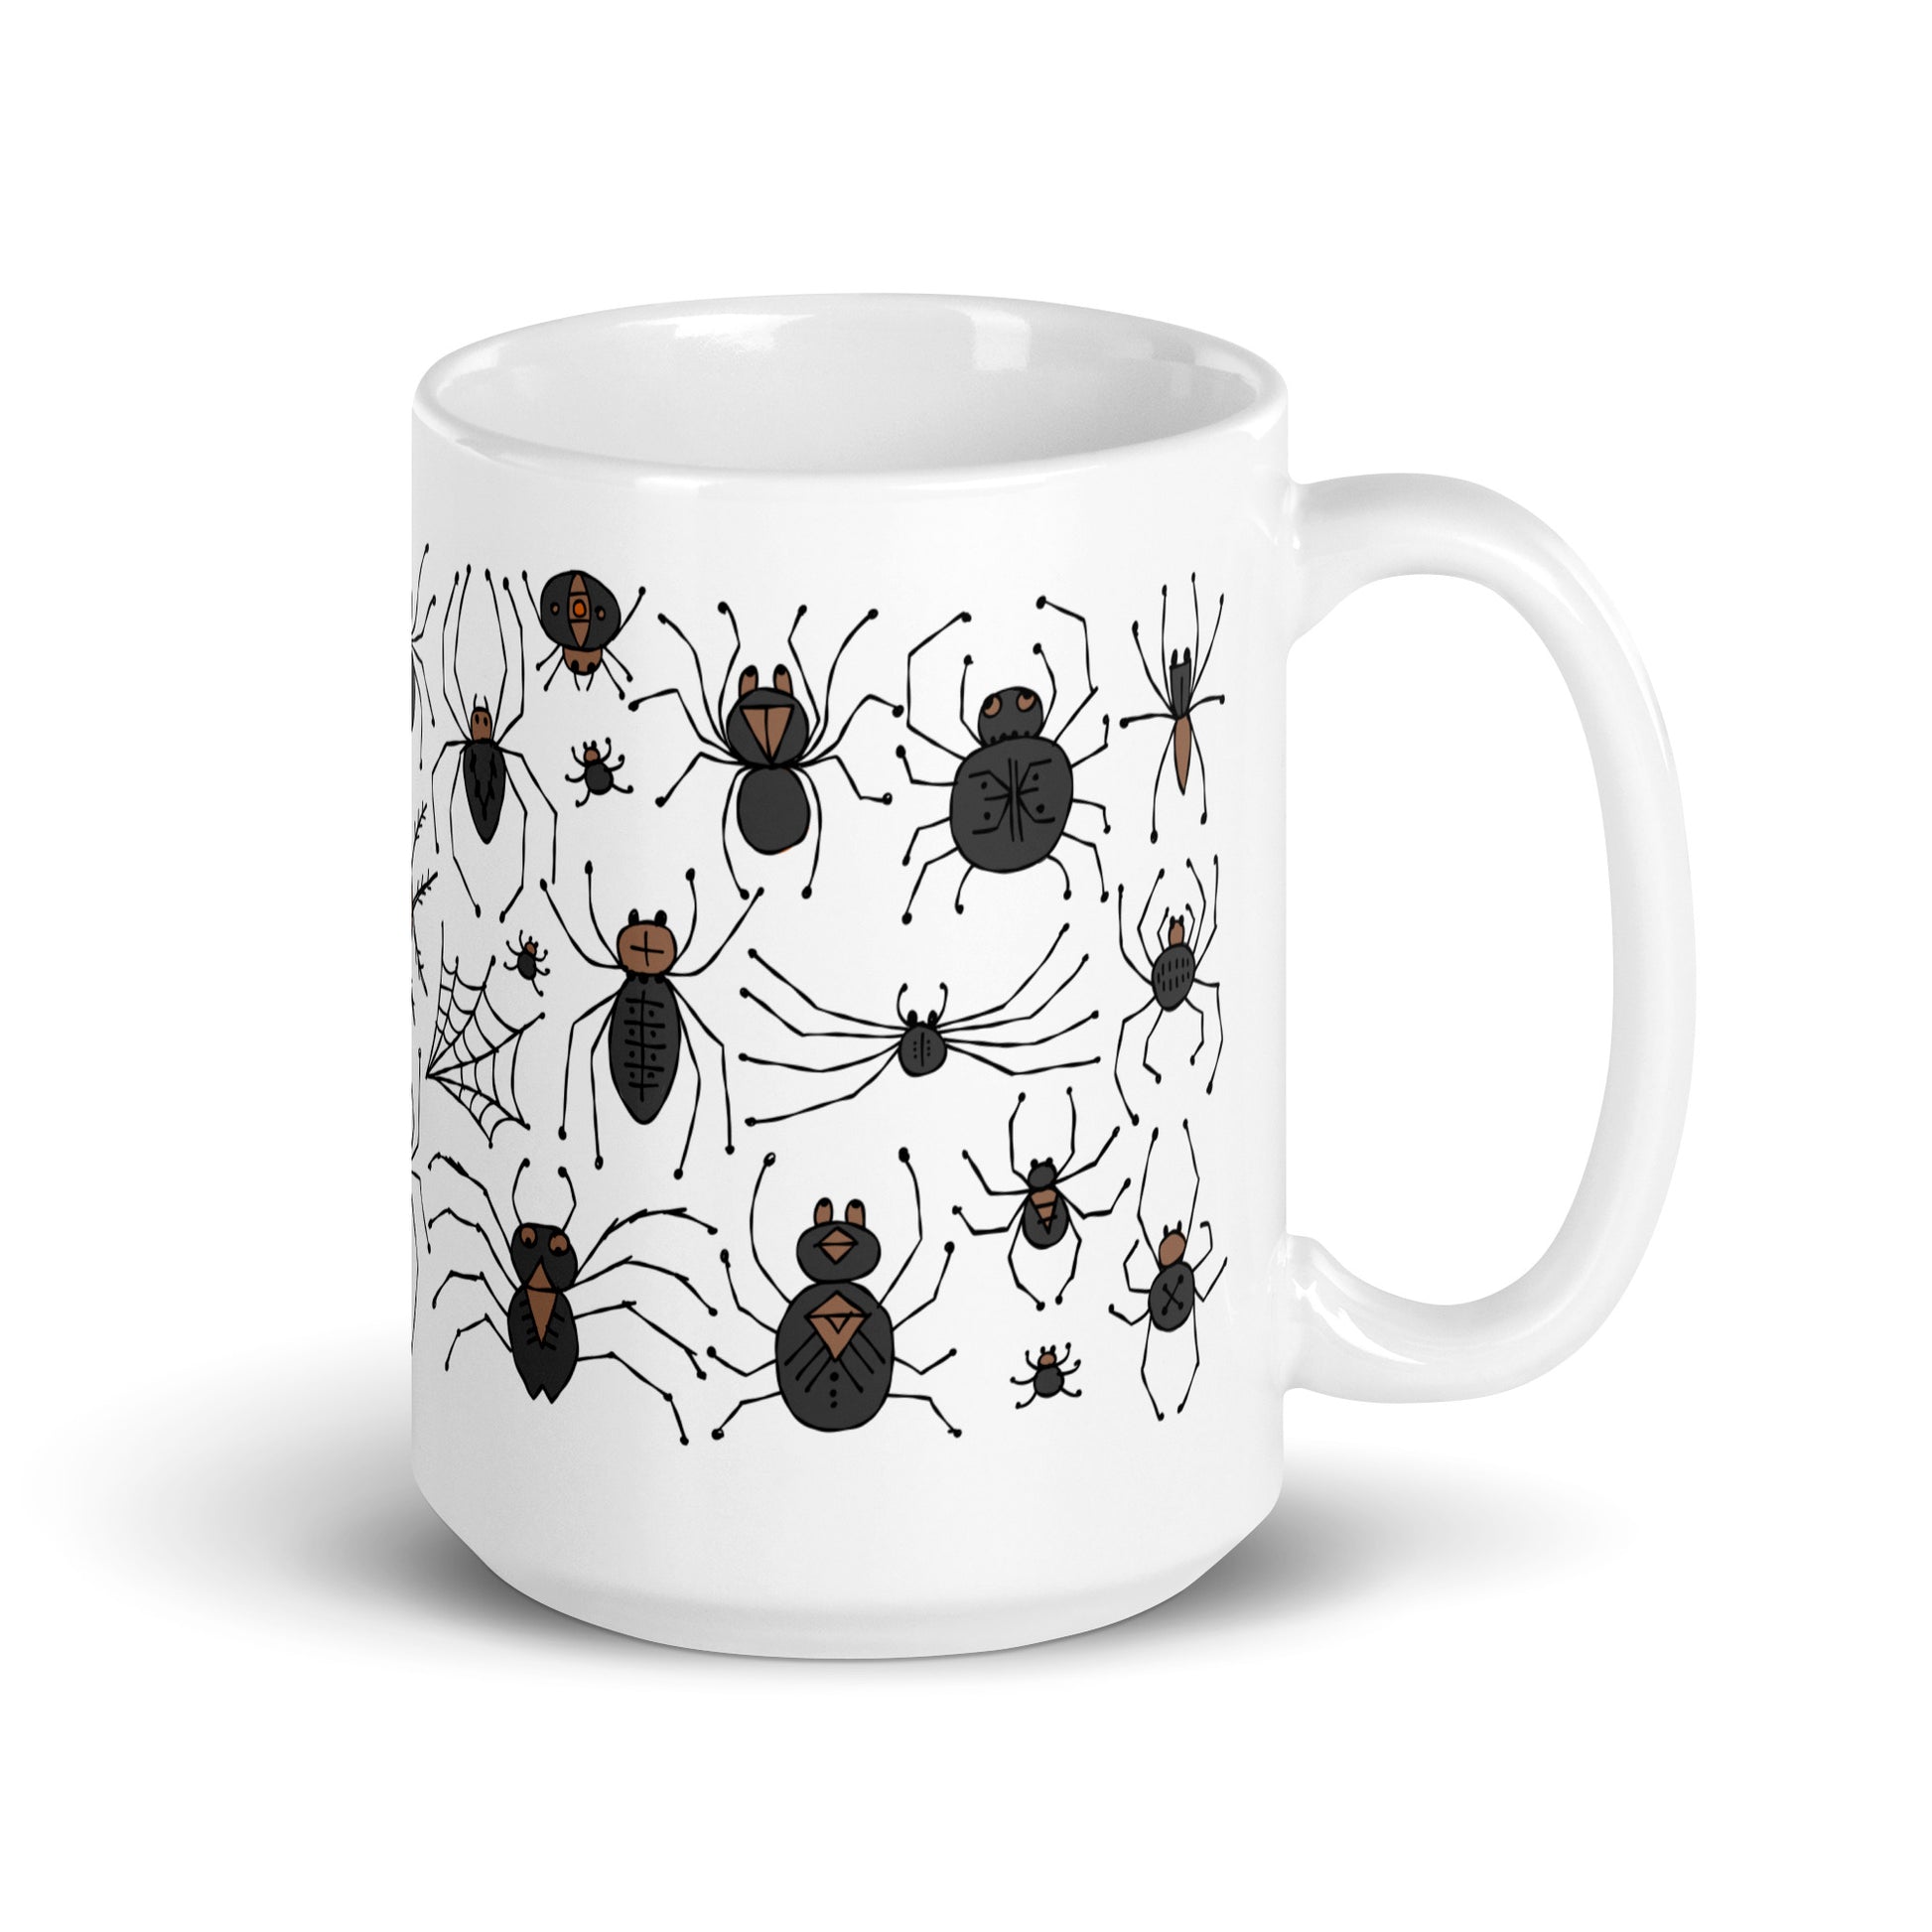 Ceramic mug 15oz with spiders for Arachnologist. Quote on mug: "Spiders are the artists of the insect world, spinning beauty from silk." - Jane Goodall. Back side